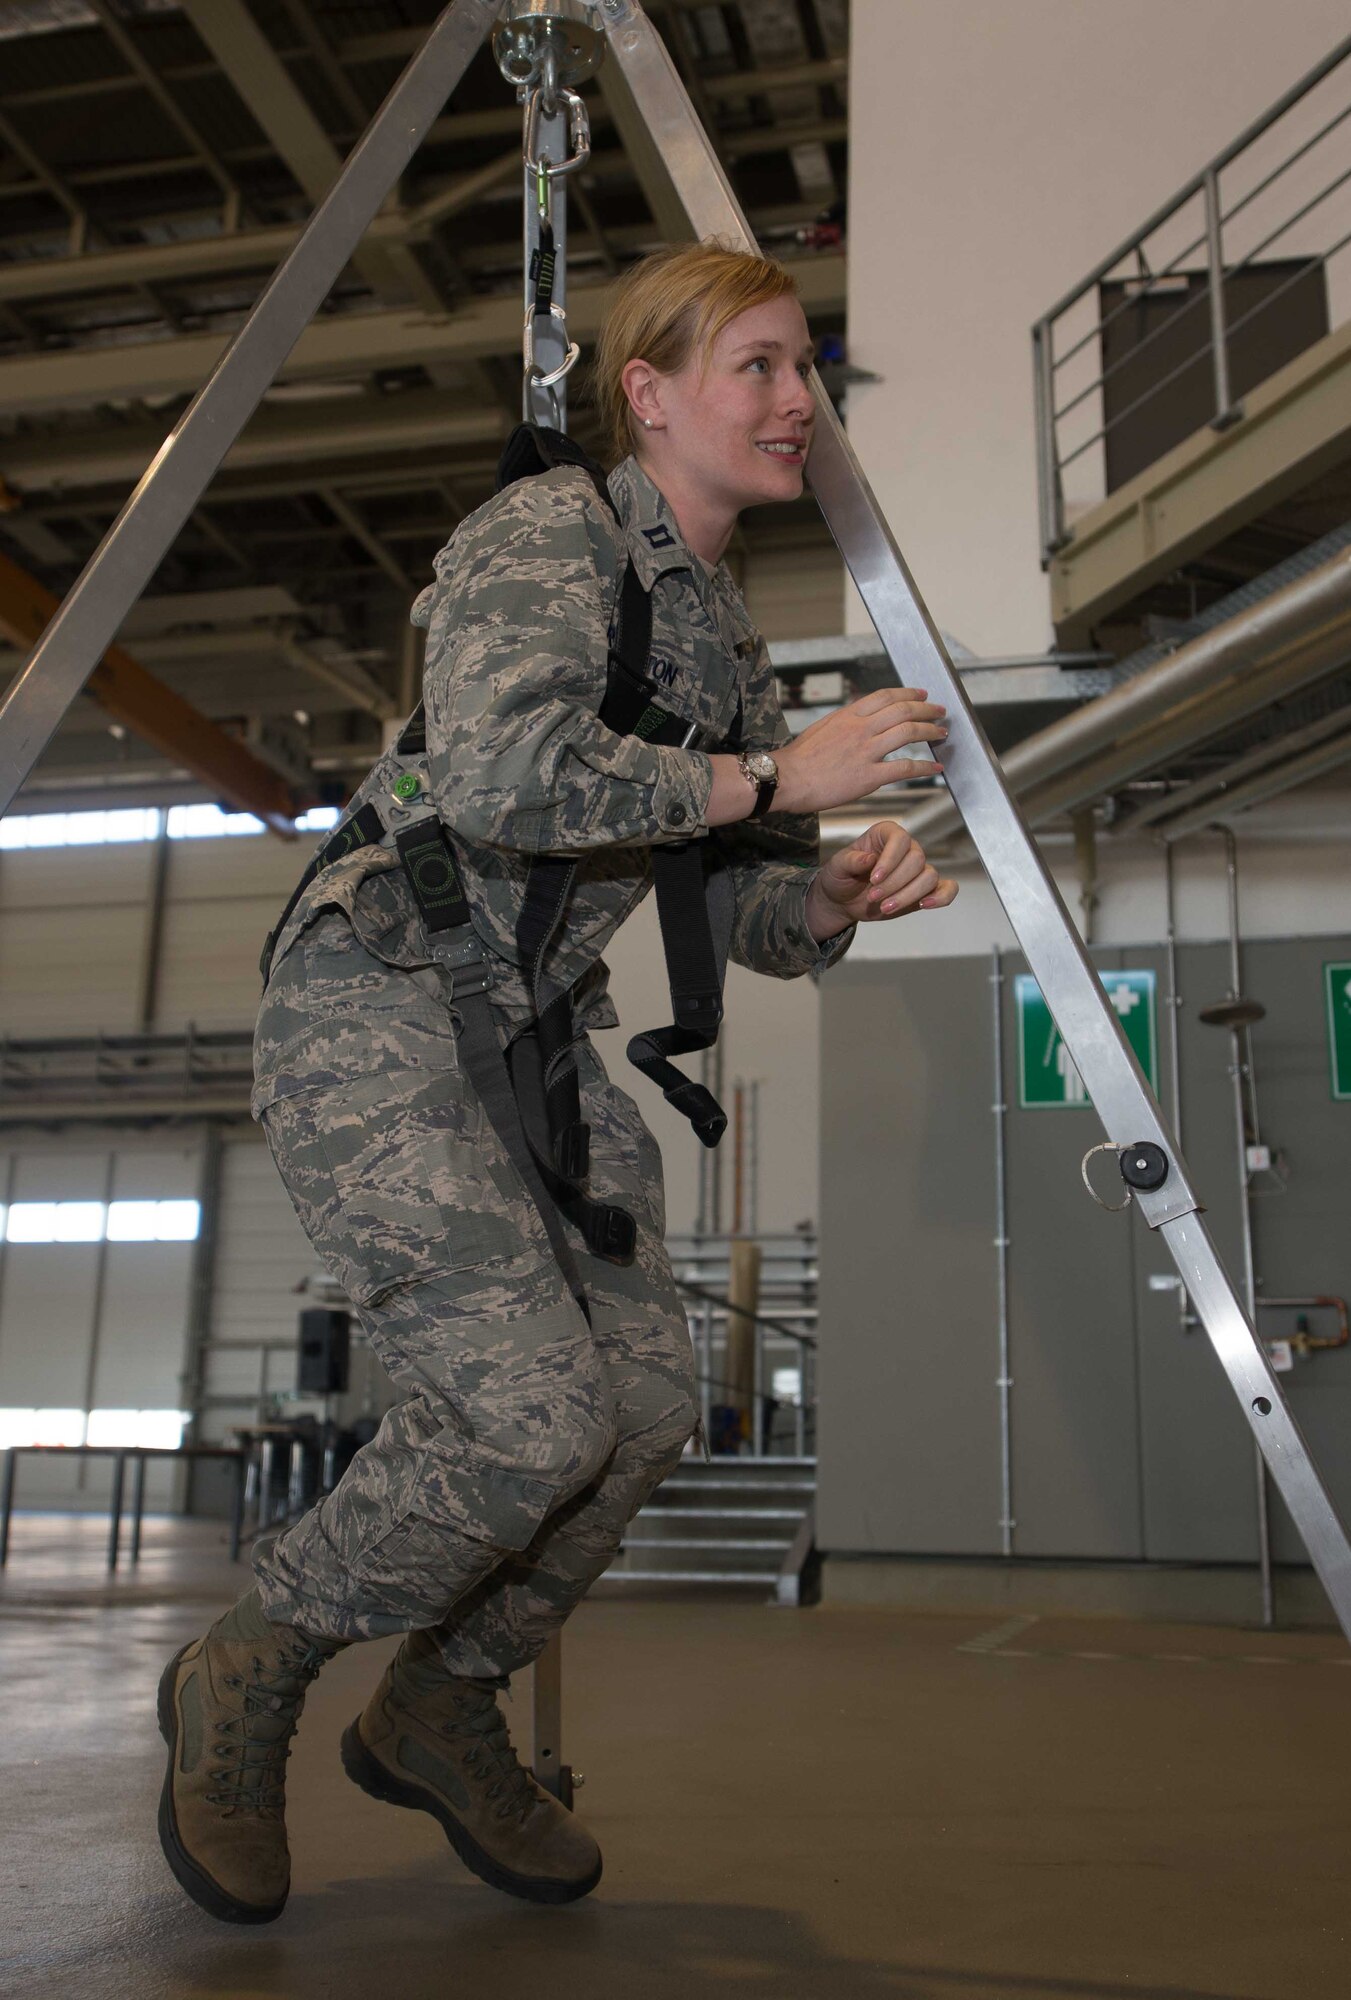 Capt. Teresa Crampton, 721st Aerial Port Squadron Passenger Services Flight commander, hangs in a safety harness during the Occupational Safety and Health Administration's Fall Prevention Stand-Down Week on Ramstein Air Base, Germany, May 10, 2017. The safety stand-down is a voluntary event in which leaders talk directly to personnel about hazards, protective methods and Air Force safety policies. The intention is to reduce the number of injuries and deaths attributed to falls that the Air Force sustains every year. (U.S. Air Force photo by Airman 1st Class Elizabeth Baker)